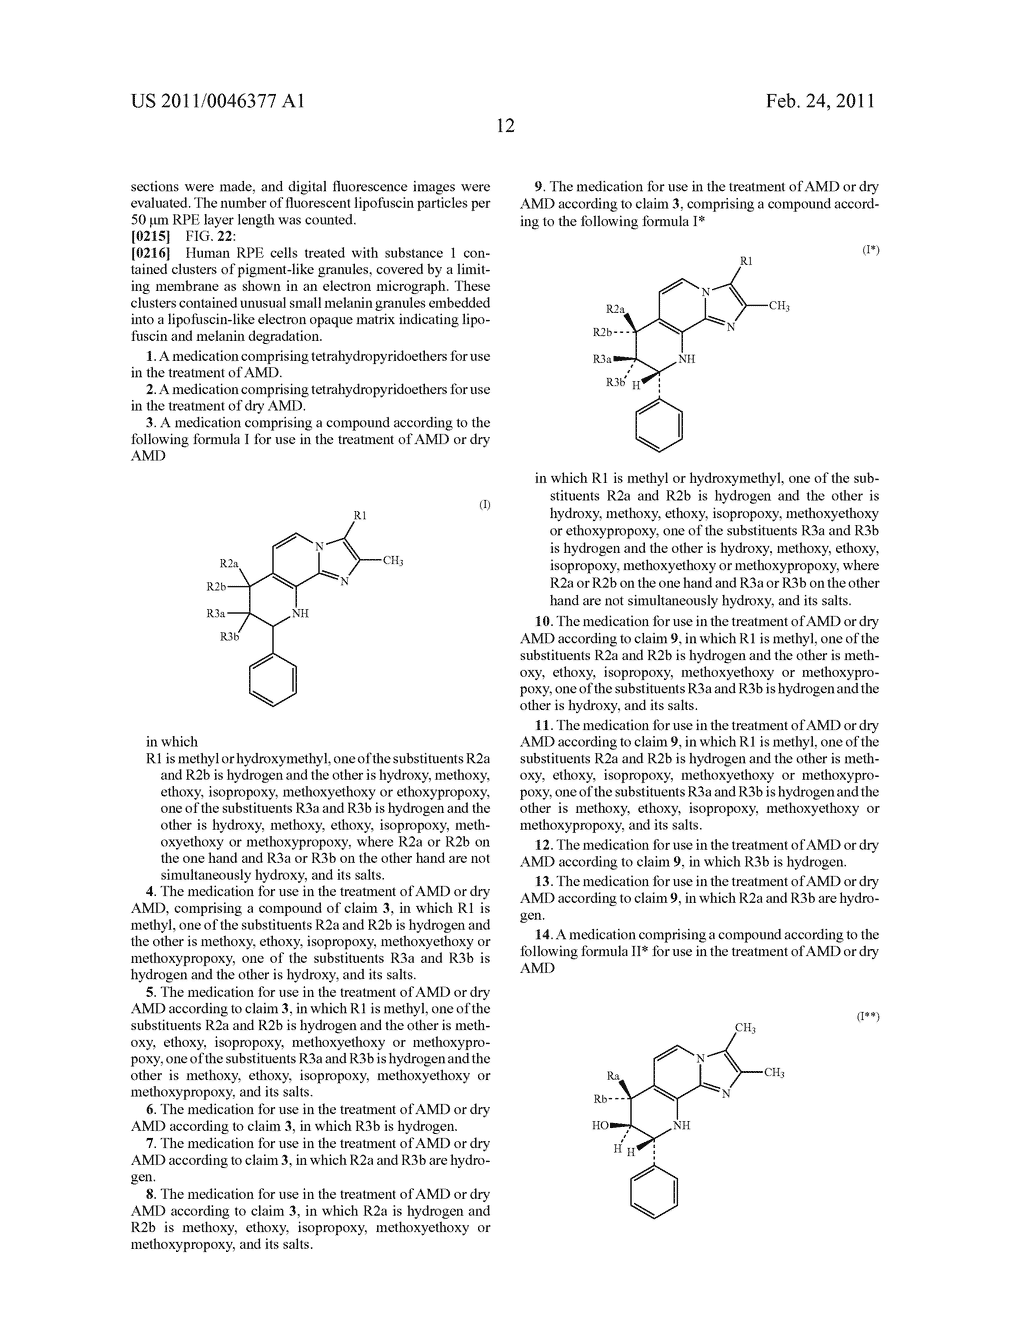 TETRAHYDROPYRIDOETHERS FOR TREATMENT OF AMD - diagram, schematic, and image 35